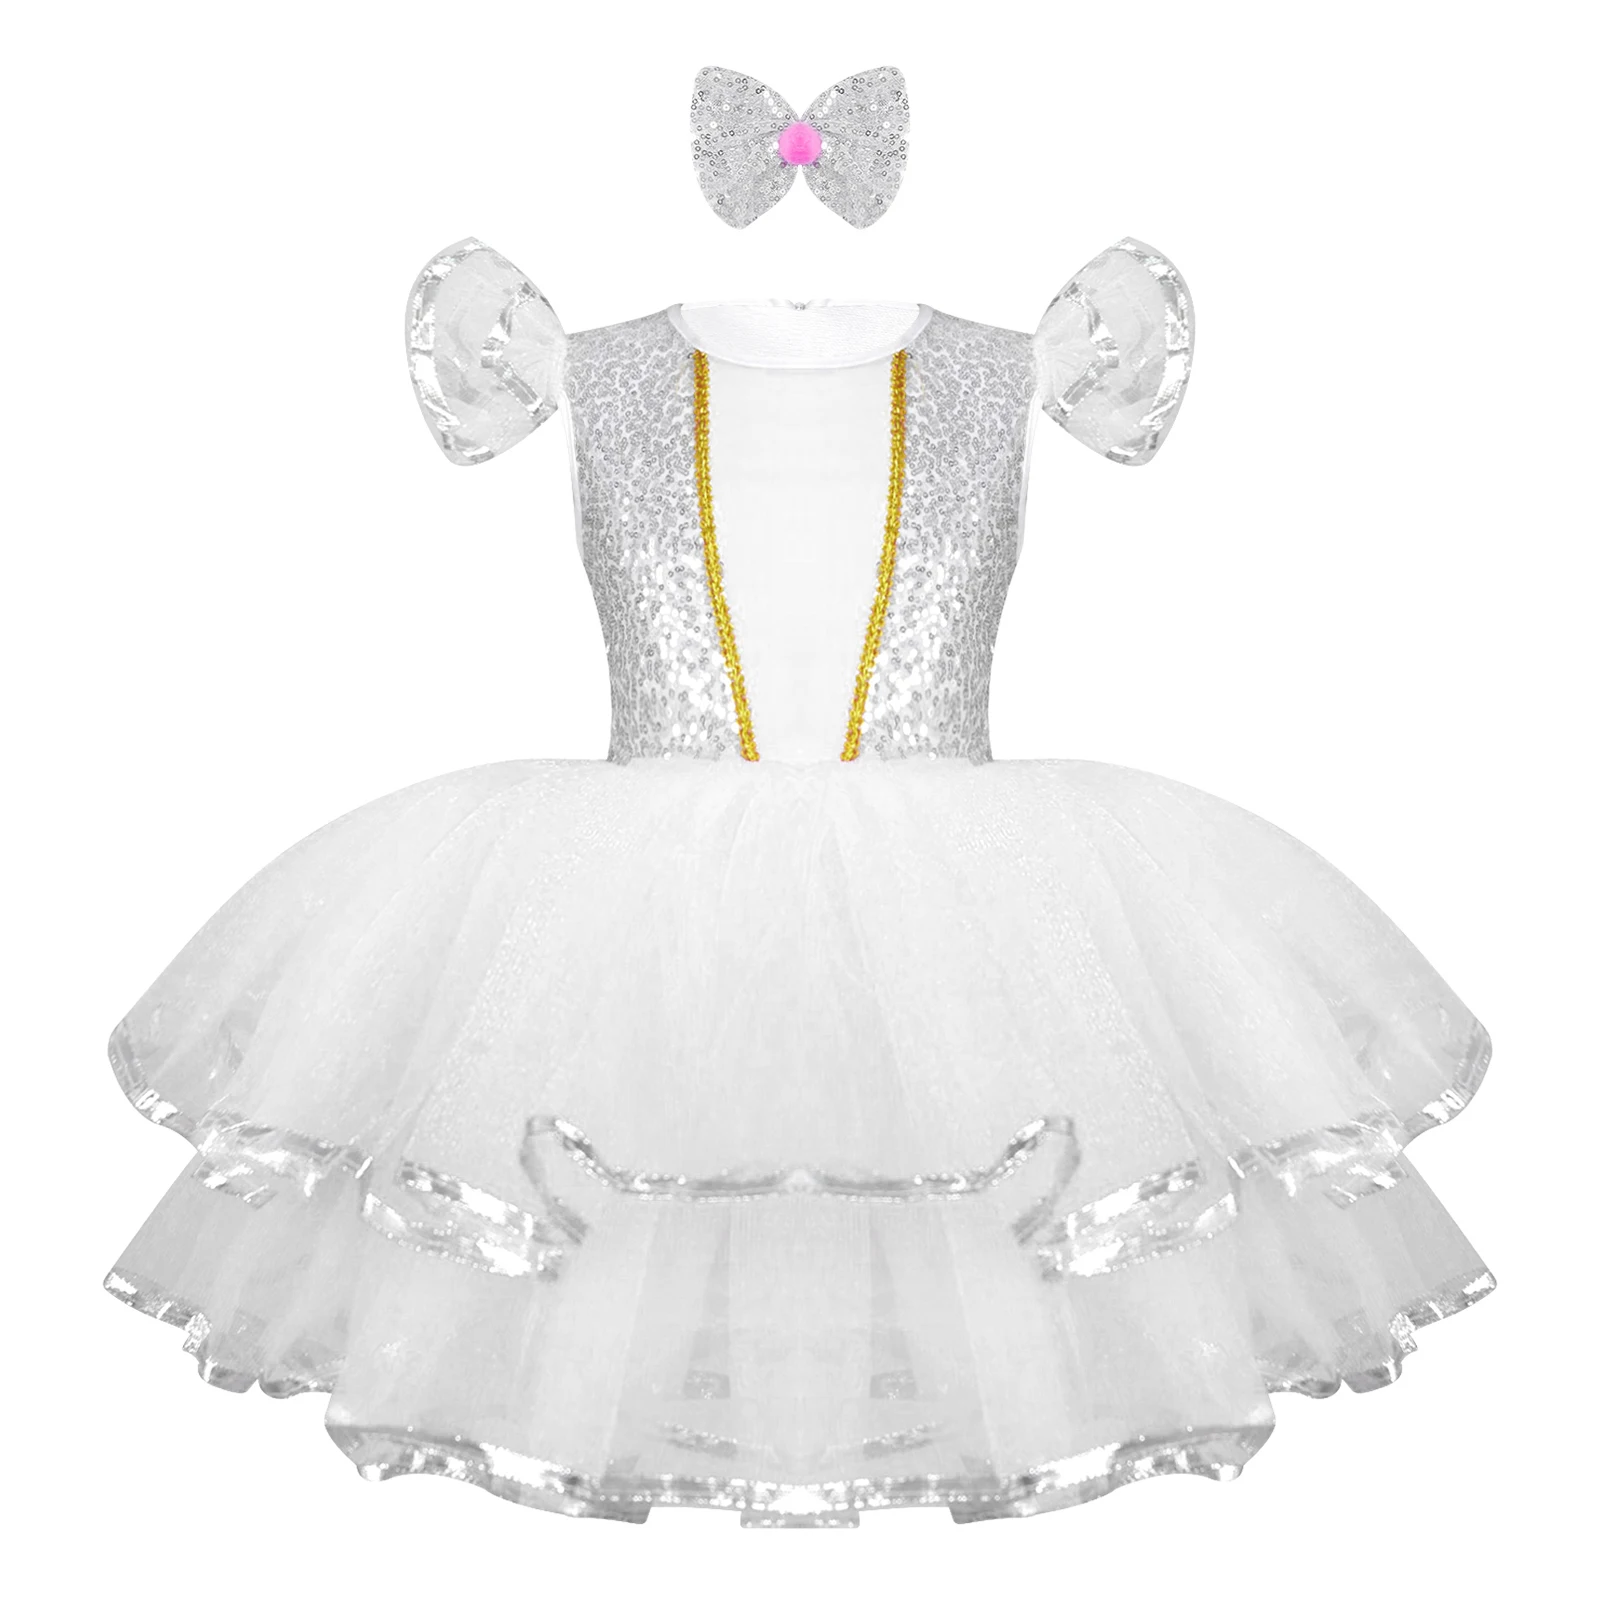 

Sparkly Sequin Ballet Tutu Dress Kids Girls Birthday Party Vestido Ball Gown Easter Ballet Tutu Costume Stage Performance Outfit